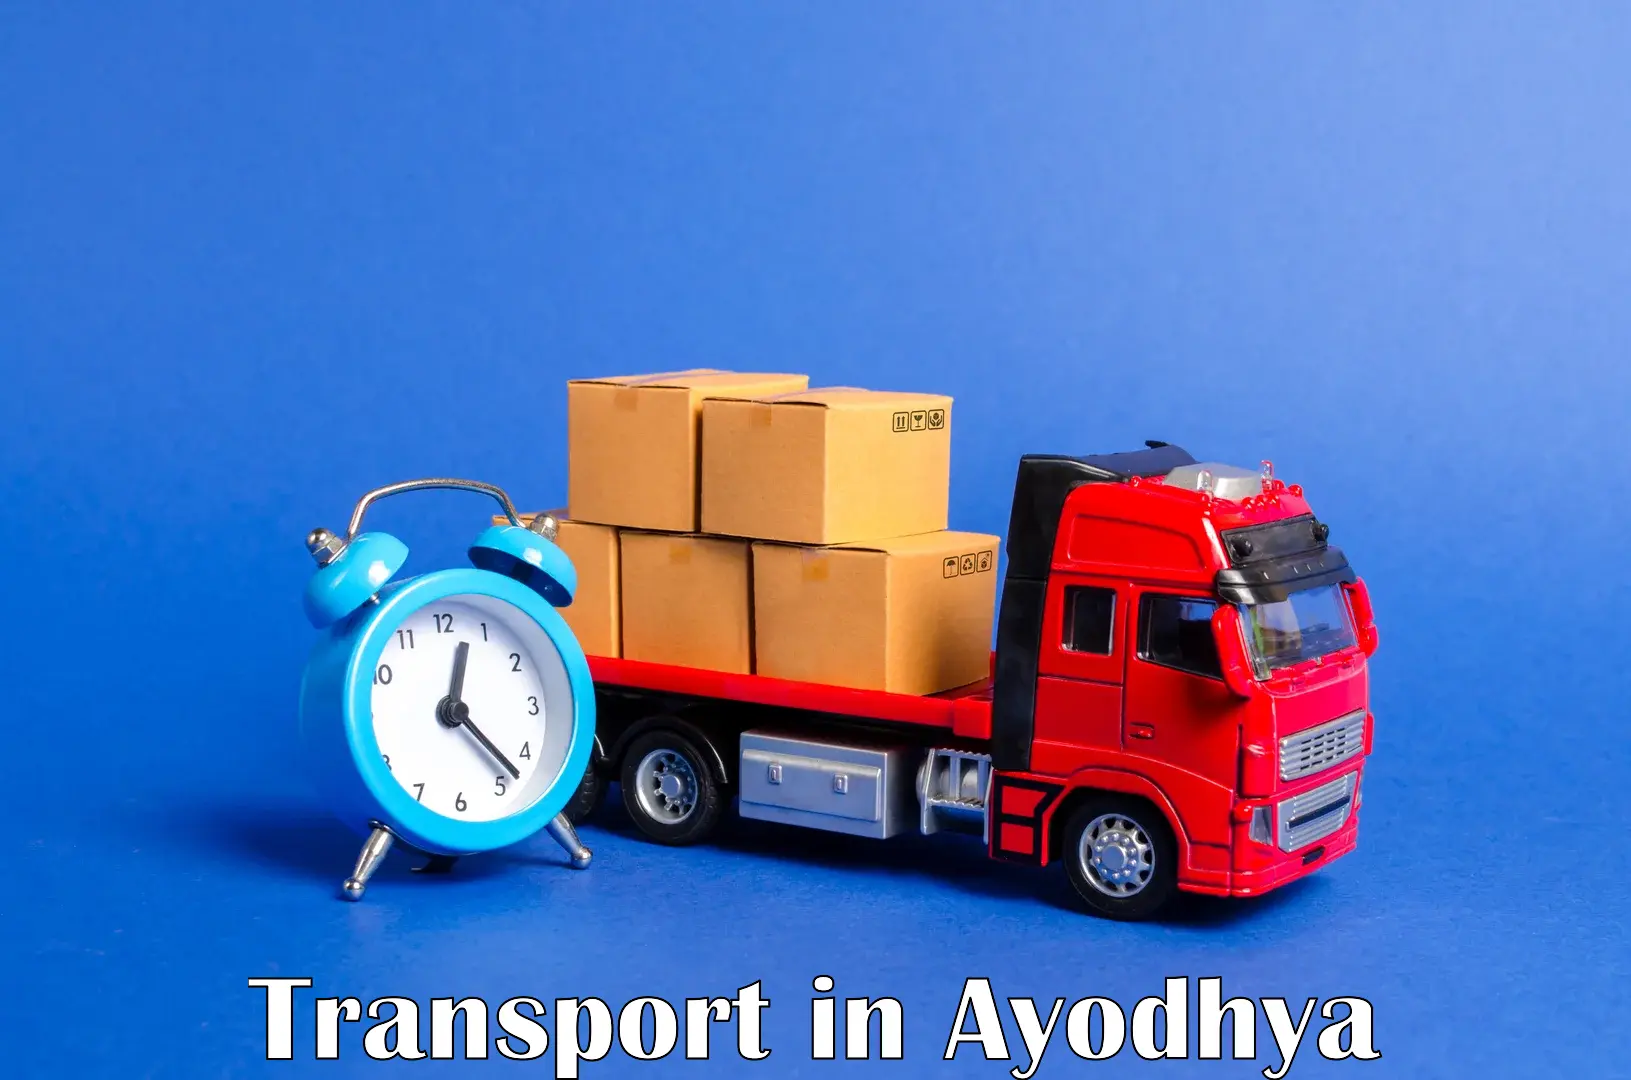 Road transport services in Ayodhya